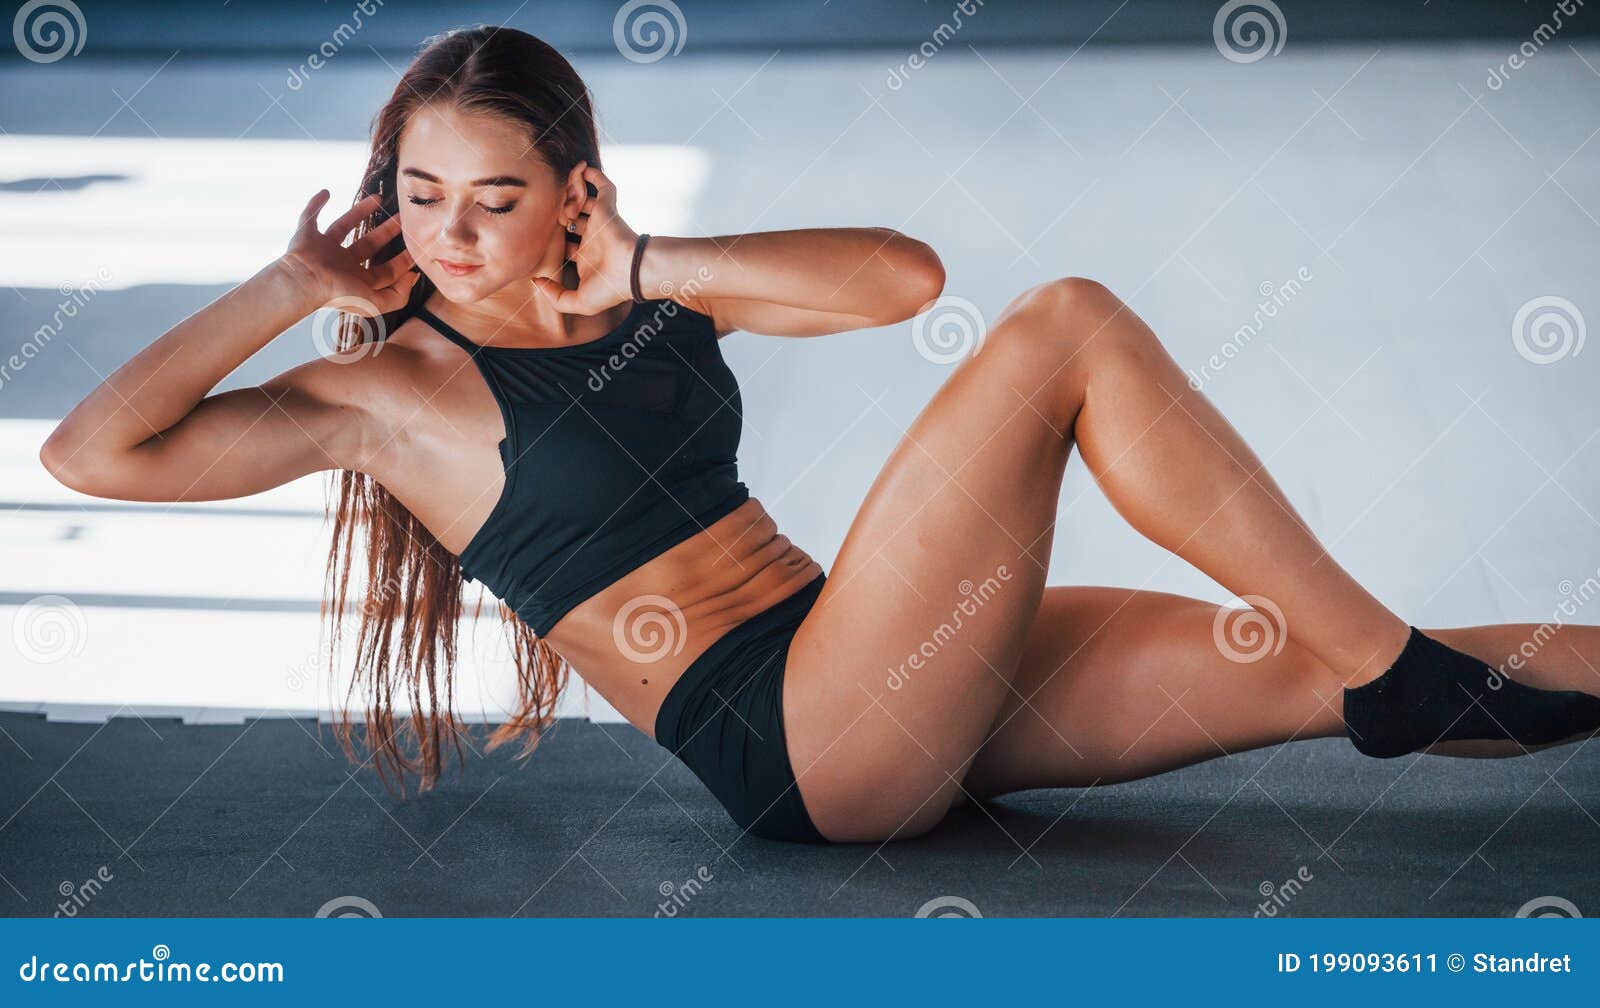 Young Slim Woman In Black Sporty Outfit Doing Gymnastics. Girl